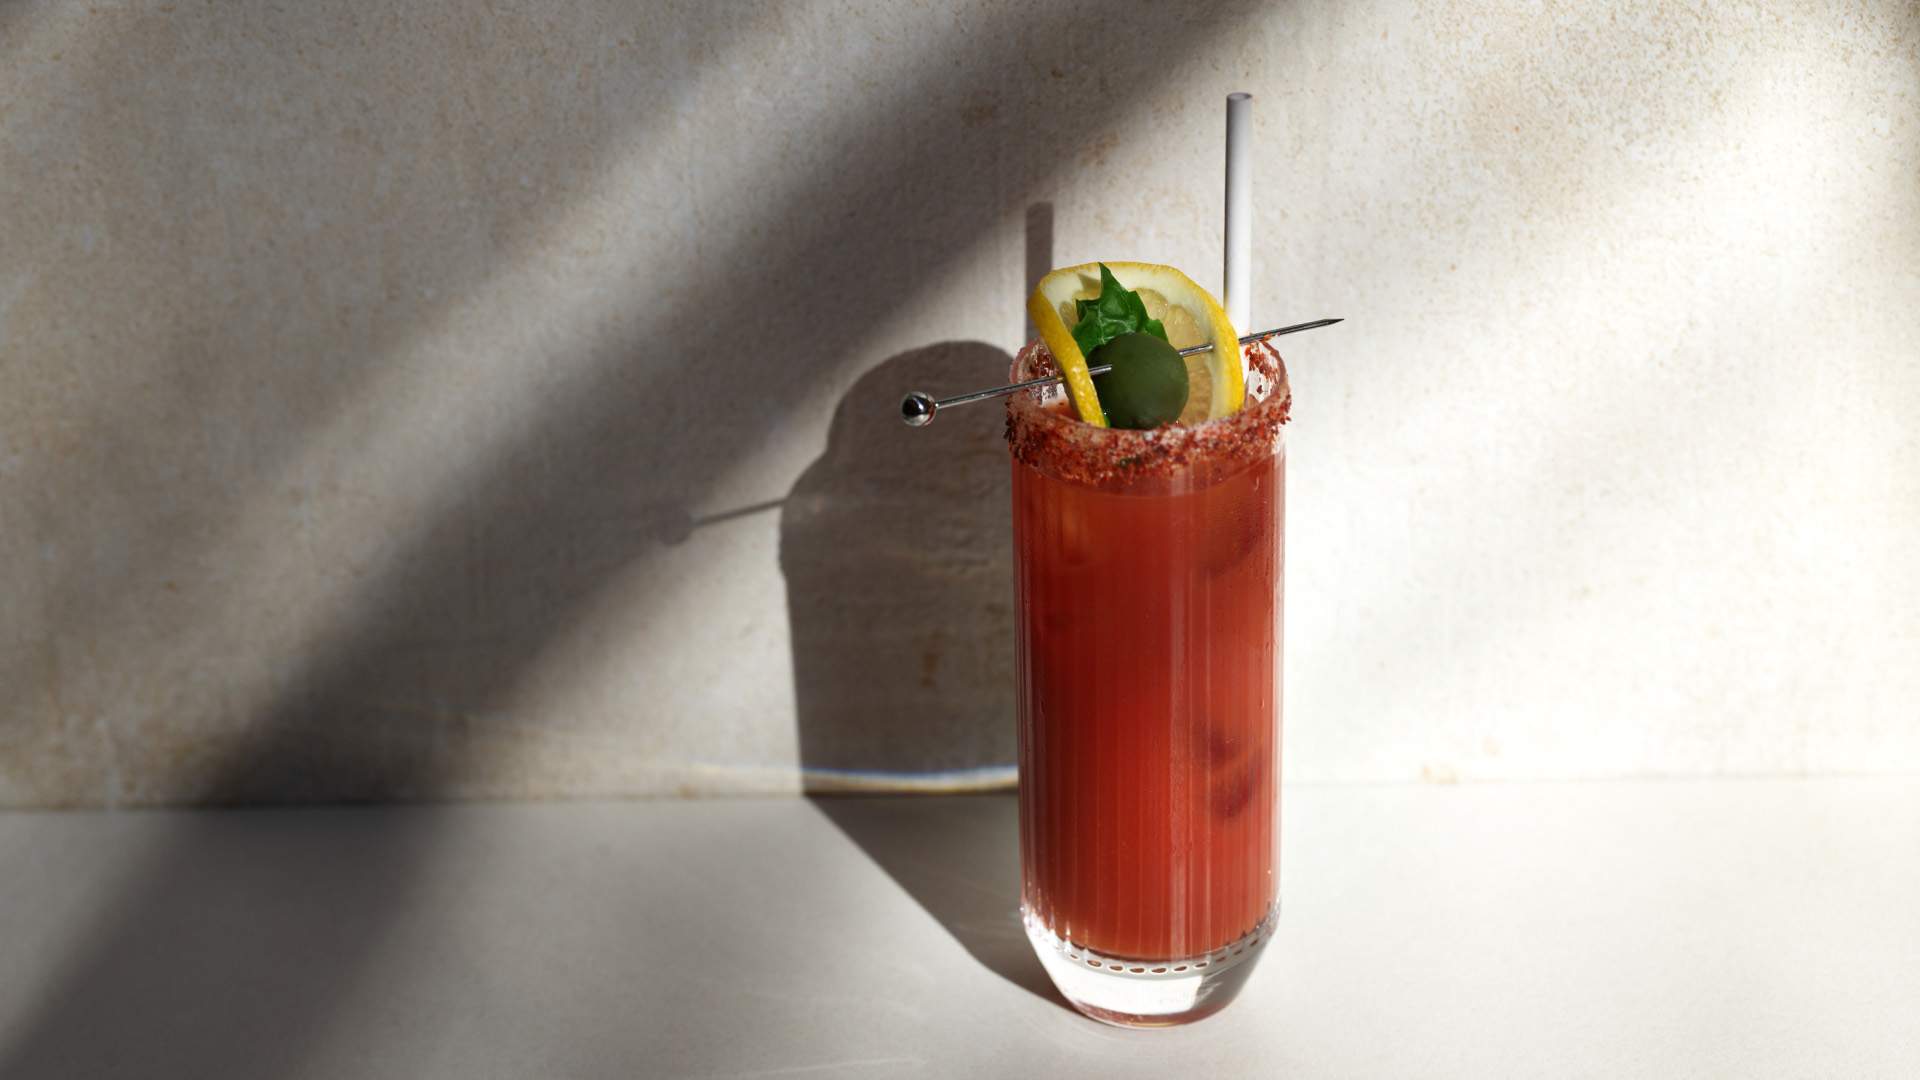 Poetica's take on a bloody mary, the Dawn, casts a shadow on a white wall